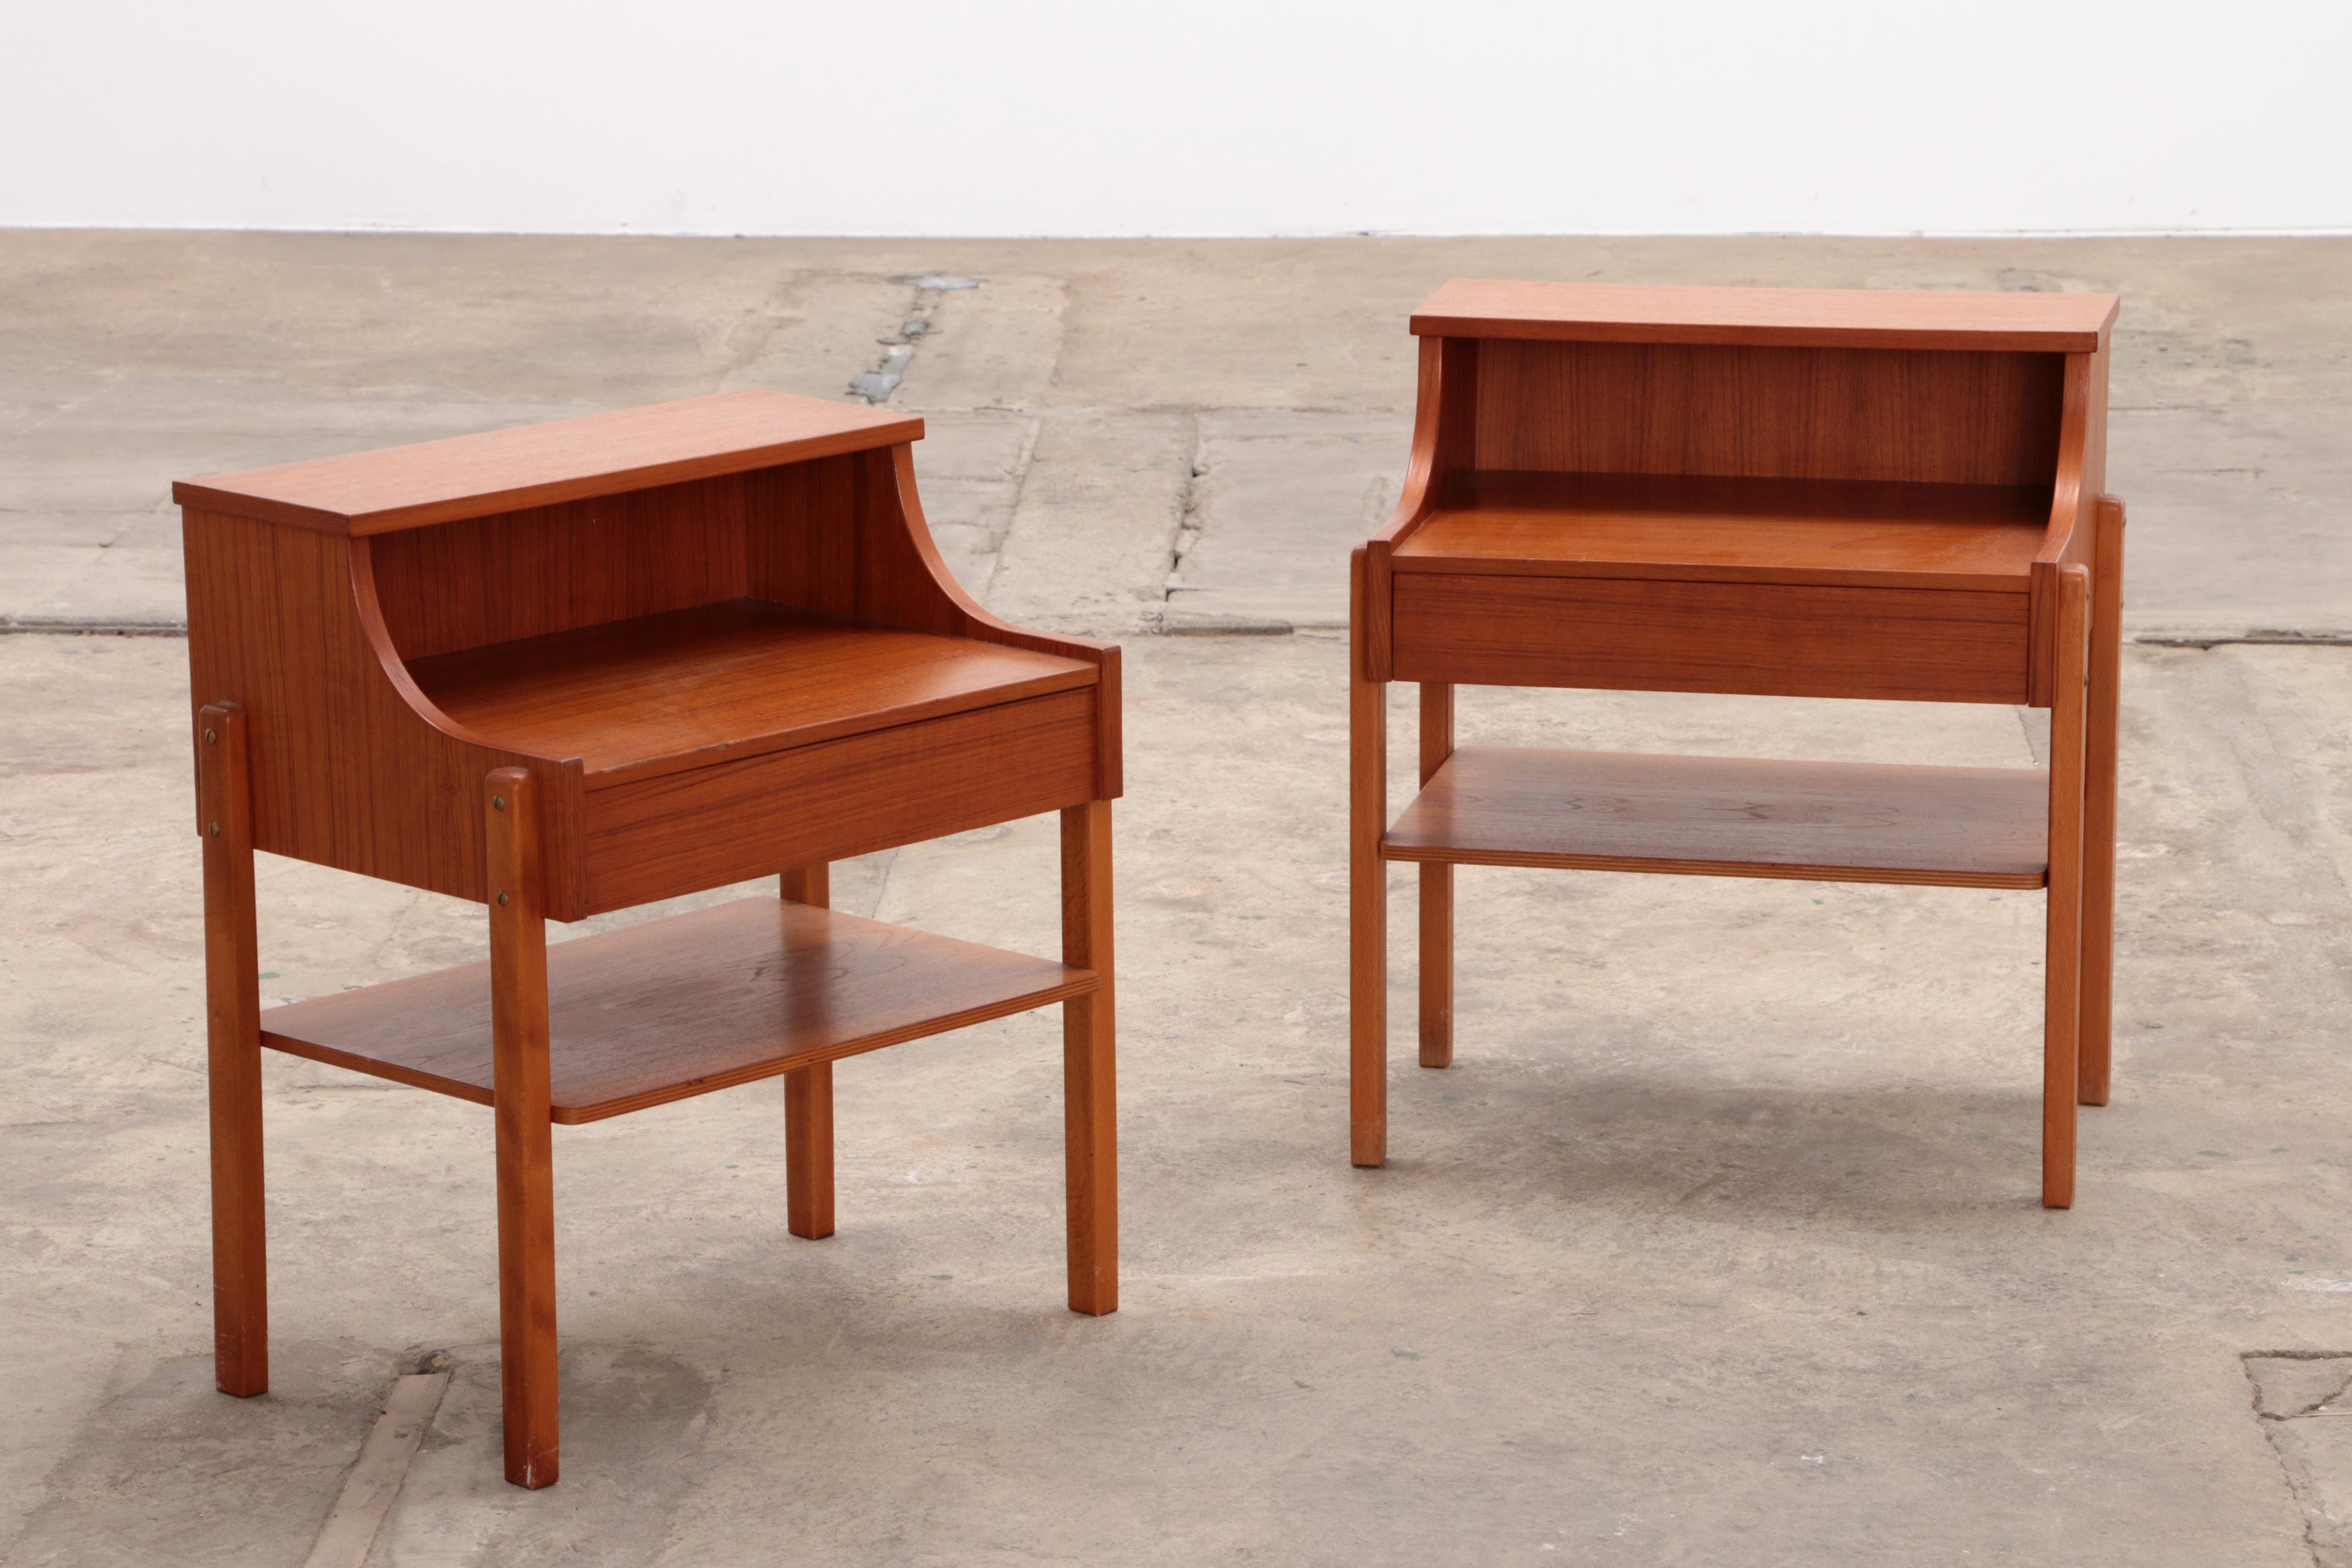 Scandinavian Bedside Tables Teak by Ab Carlstrom & Co, 1960 Sweden
This is a beautiful pair of Swedish teak bedside tables.

Made circa 1960 Made by Carlstrom & Co

They have a teak top with a single drawer underneath and a small shelf

The design